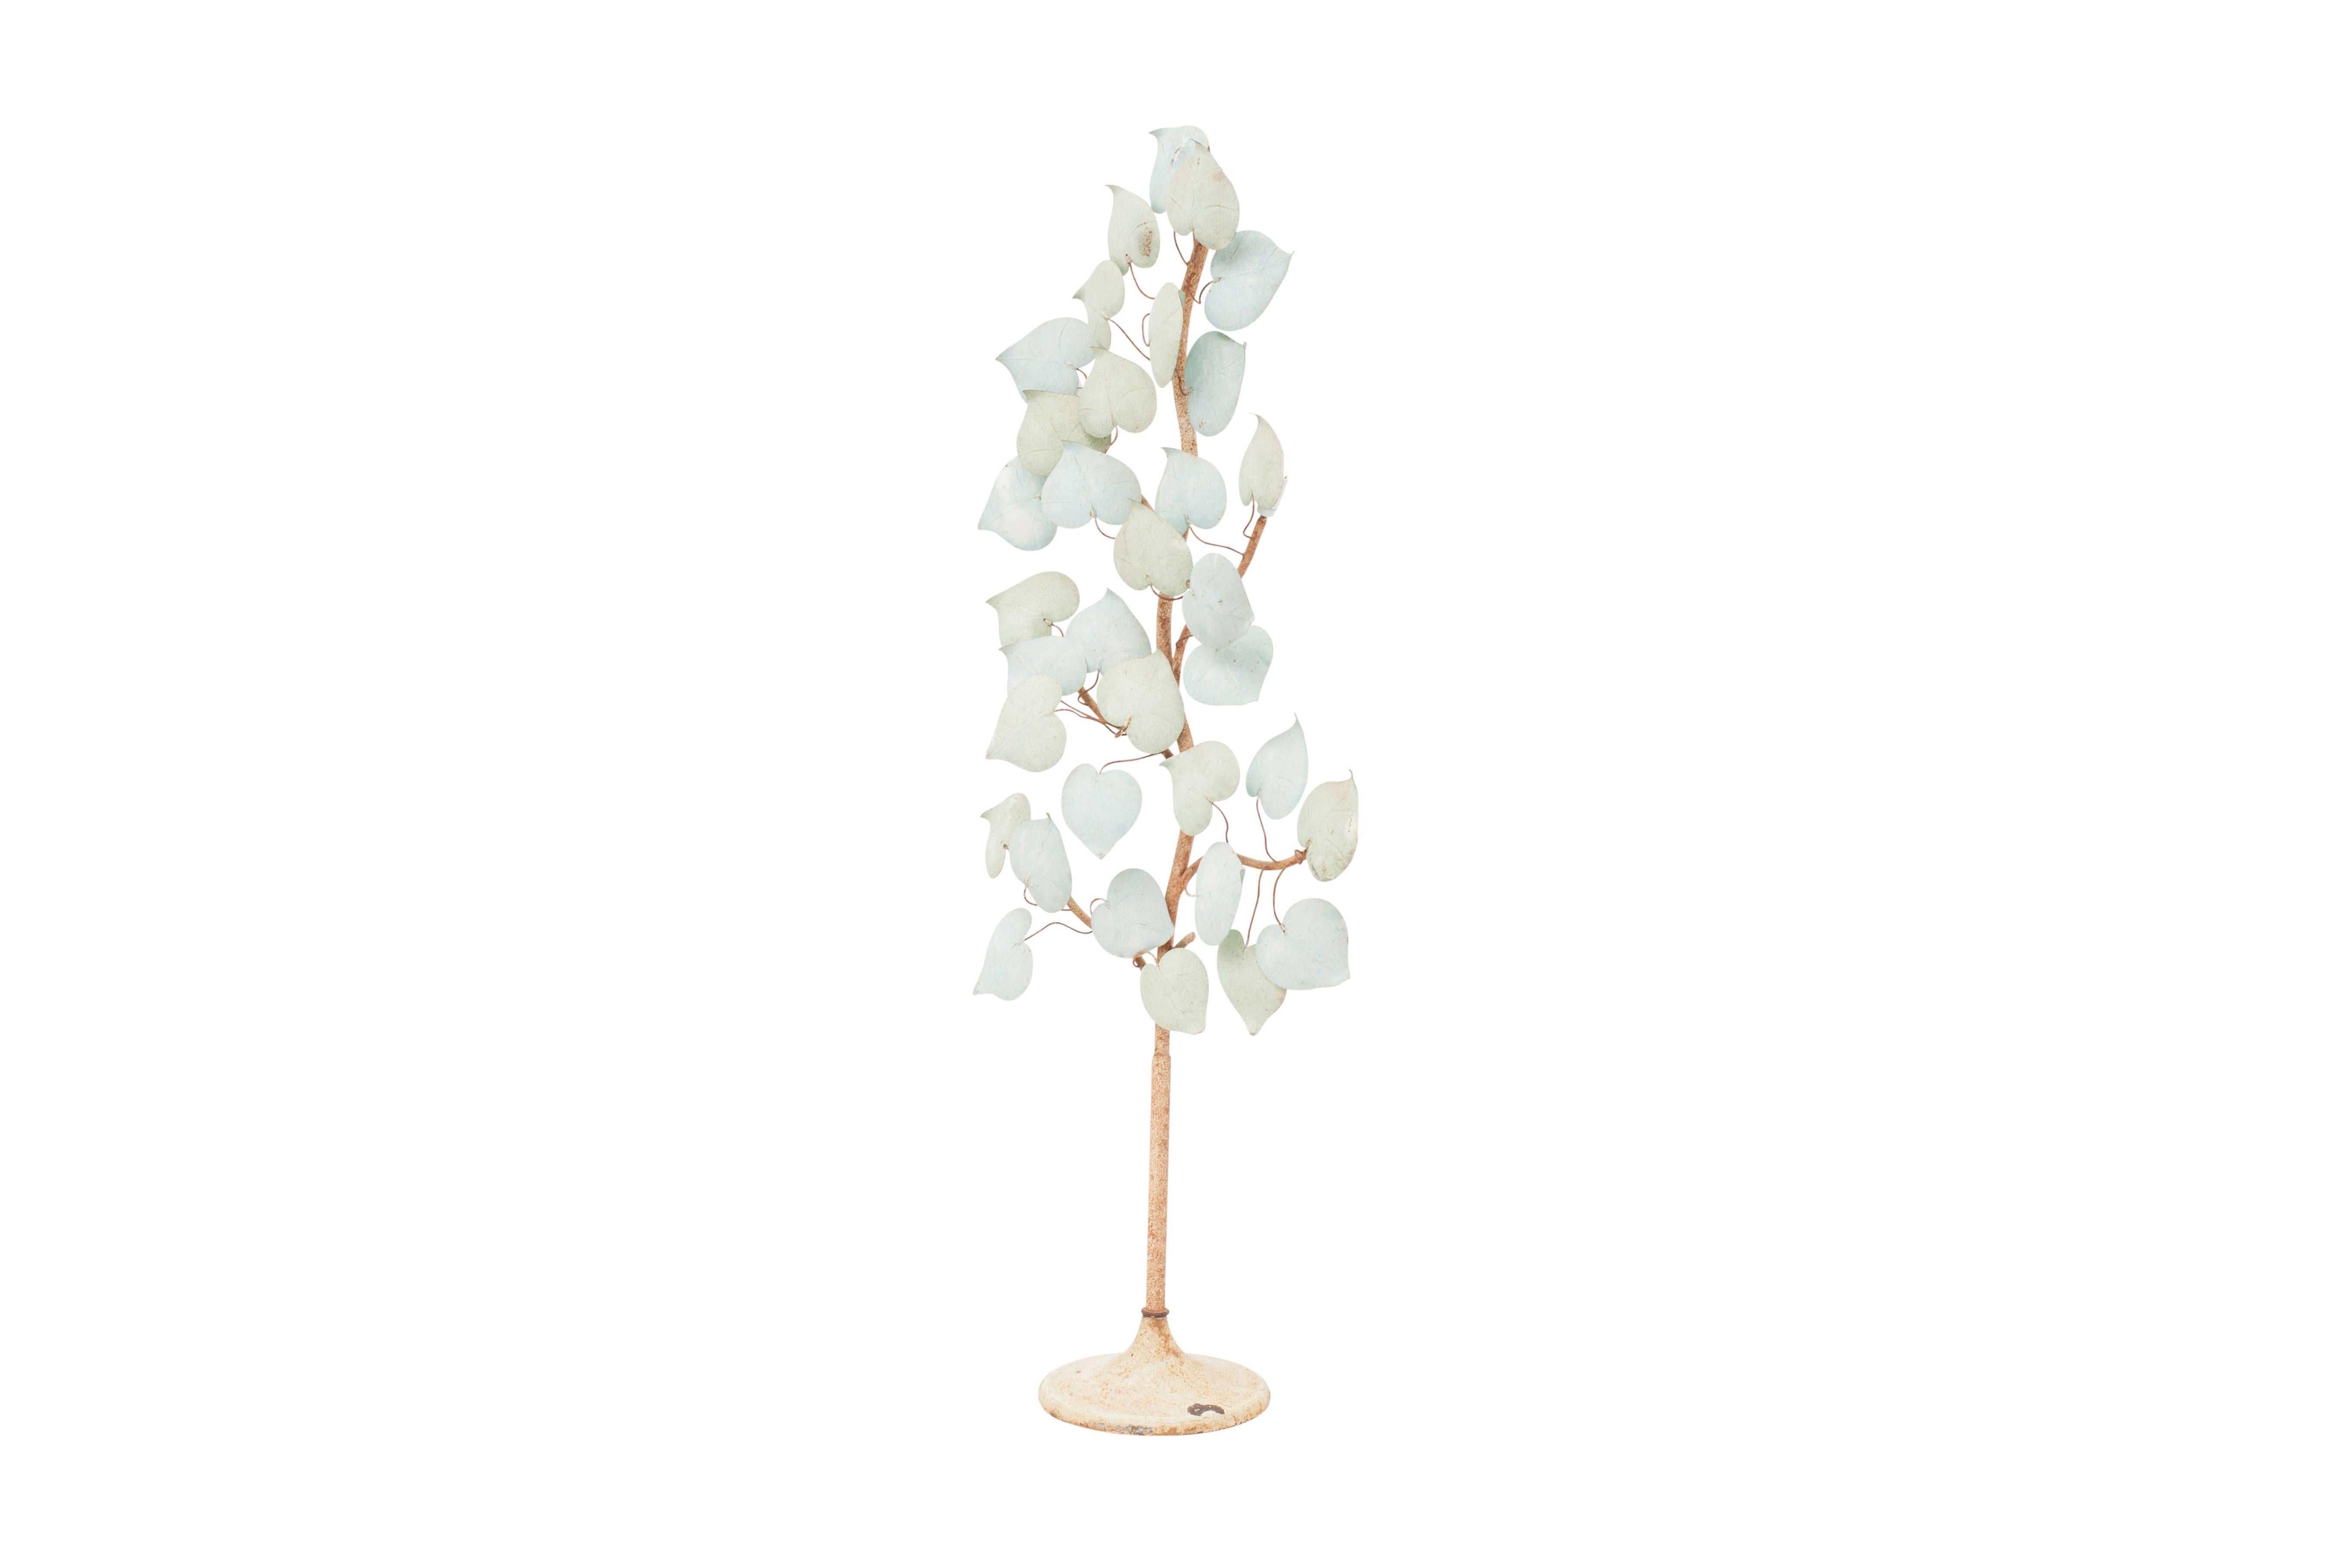 French metal floor lamp representing a Eucalypt with it's typical heart shaped leaves
Although the lamp has suffered from oxidation over the years this brings only more character and Ambience to it.
Produced in the 1950s
Measures: H 161 cm, B 71